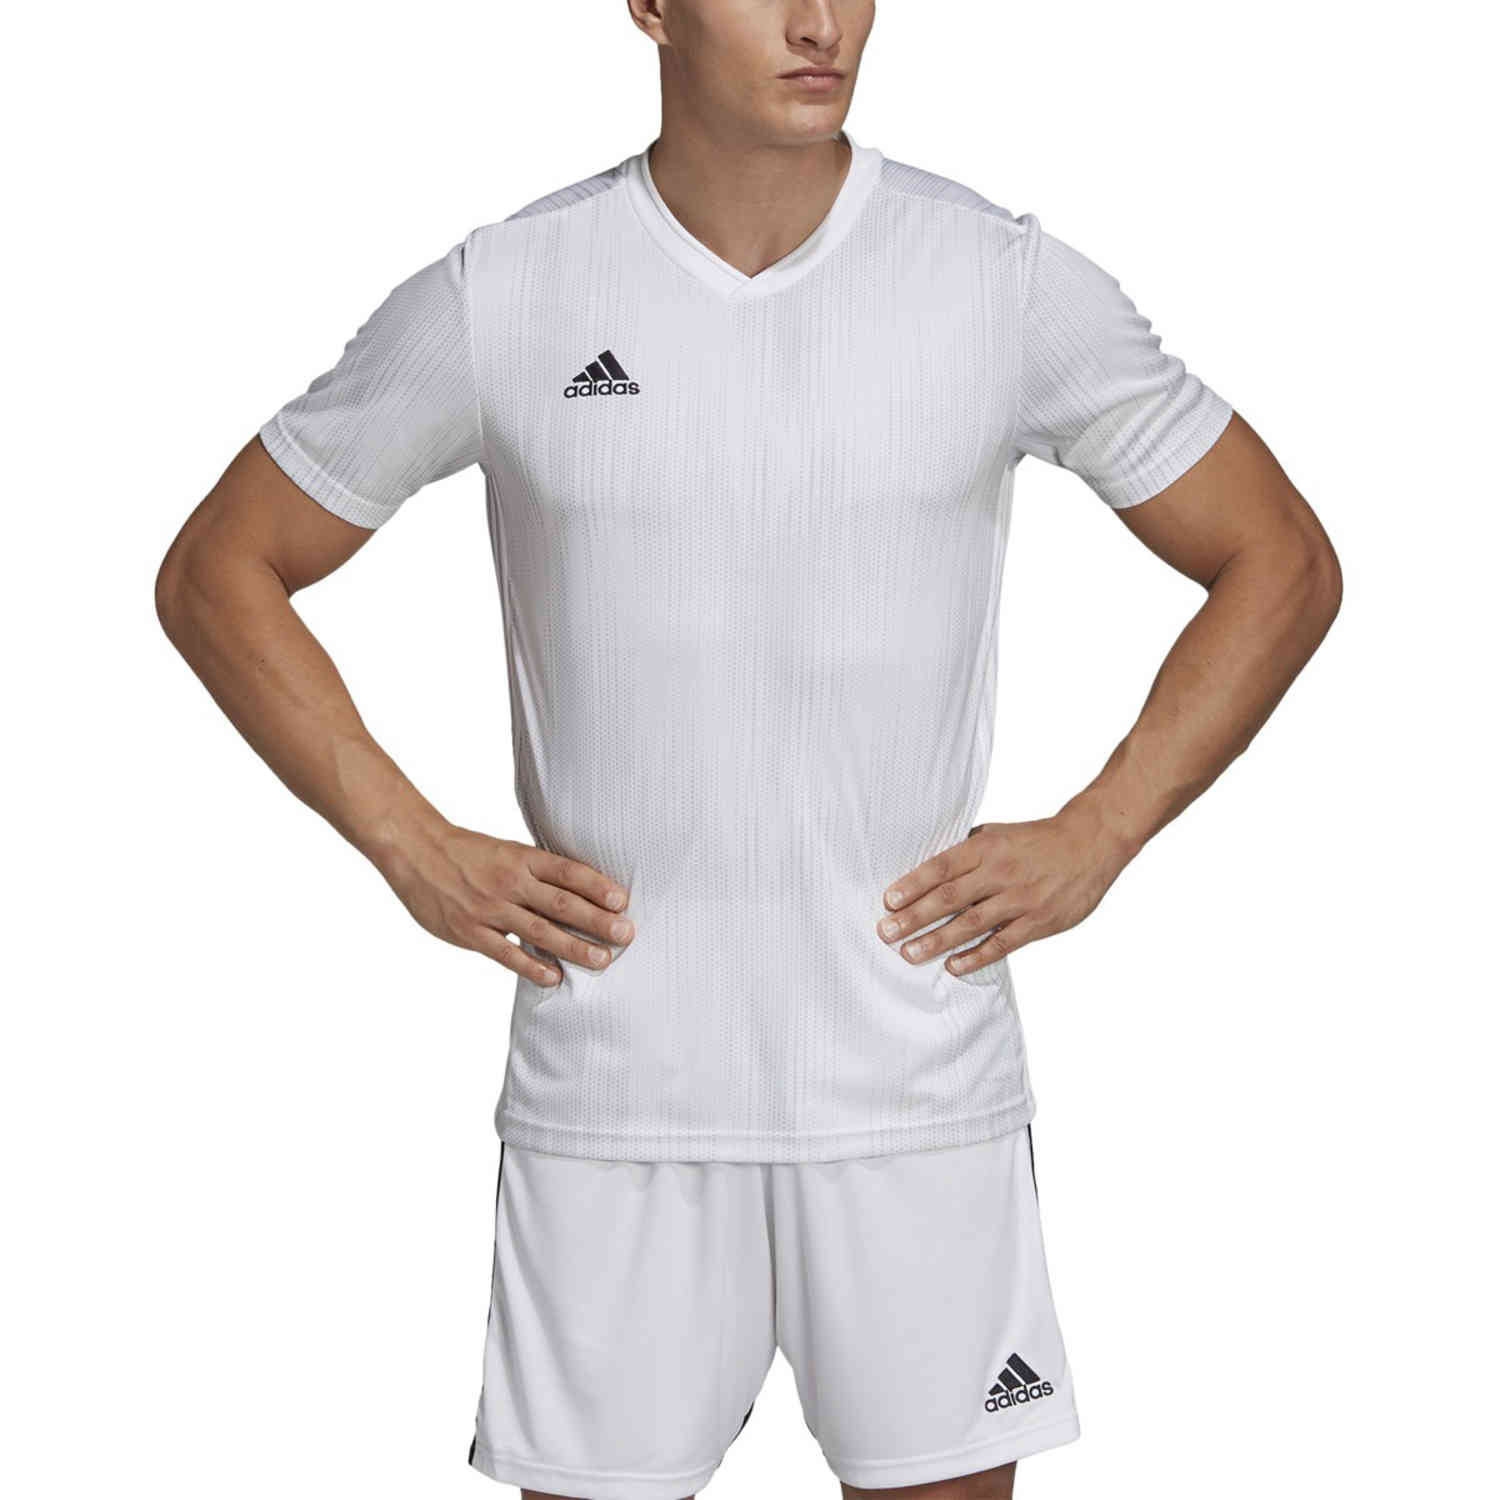 adidas white jersey Online Shopping for 